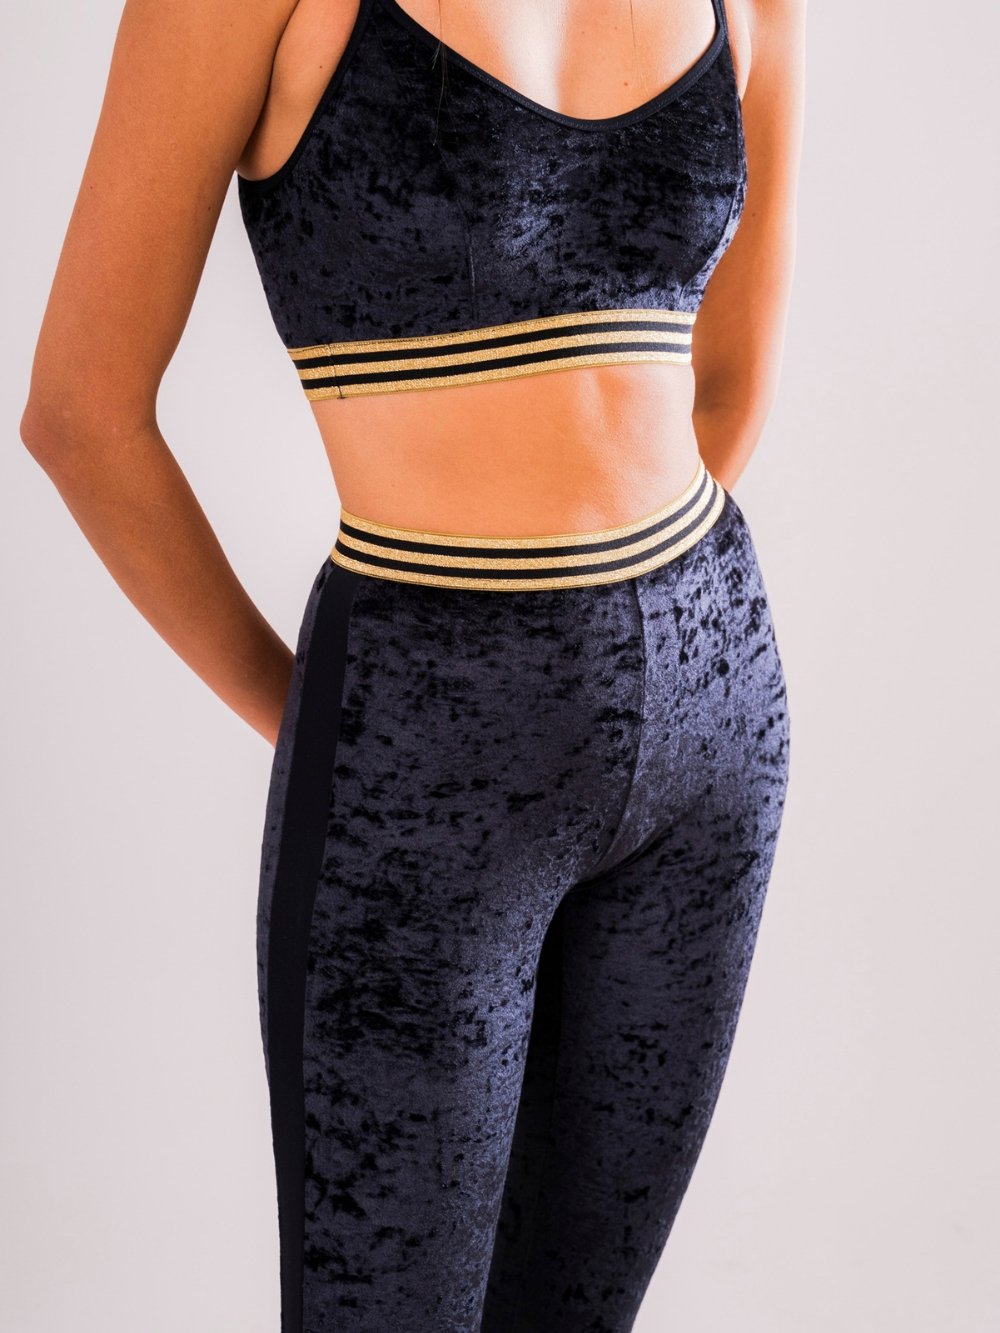 Jungle Sports Leggings - Luxury underwear and lingerie made in Italy. –  Carami